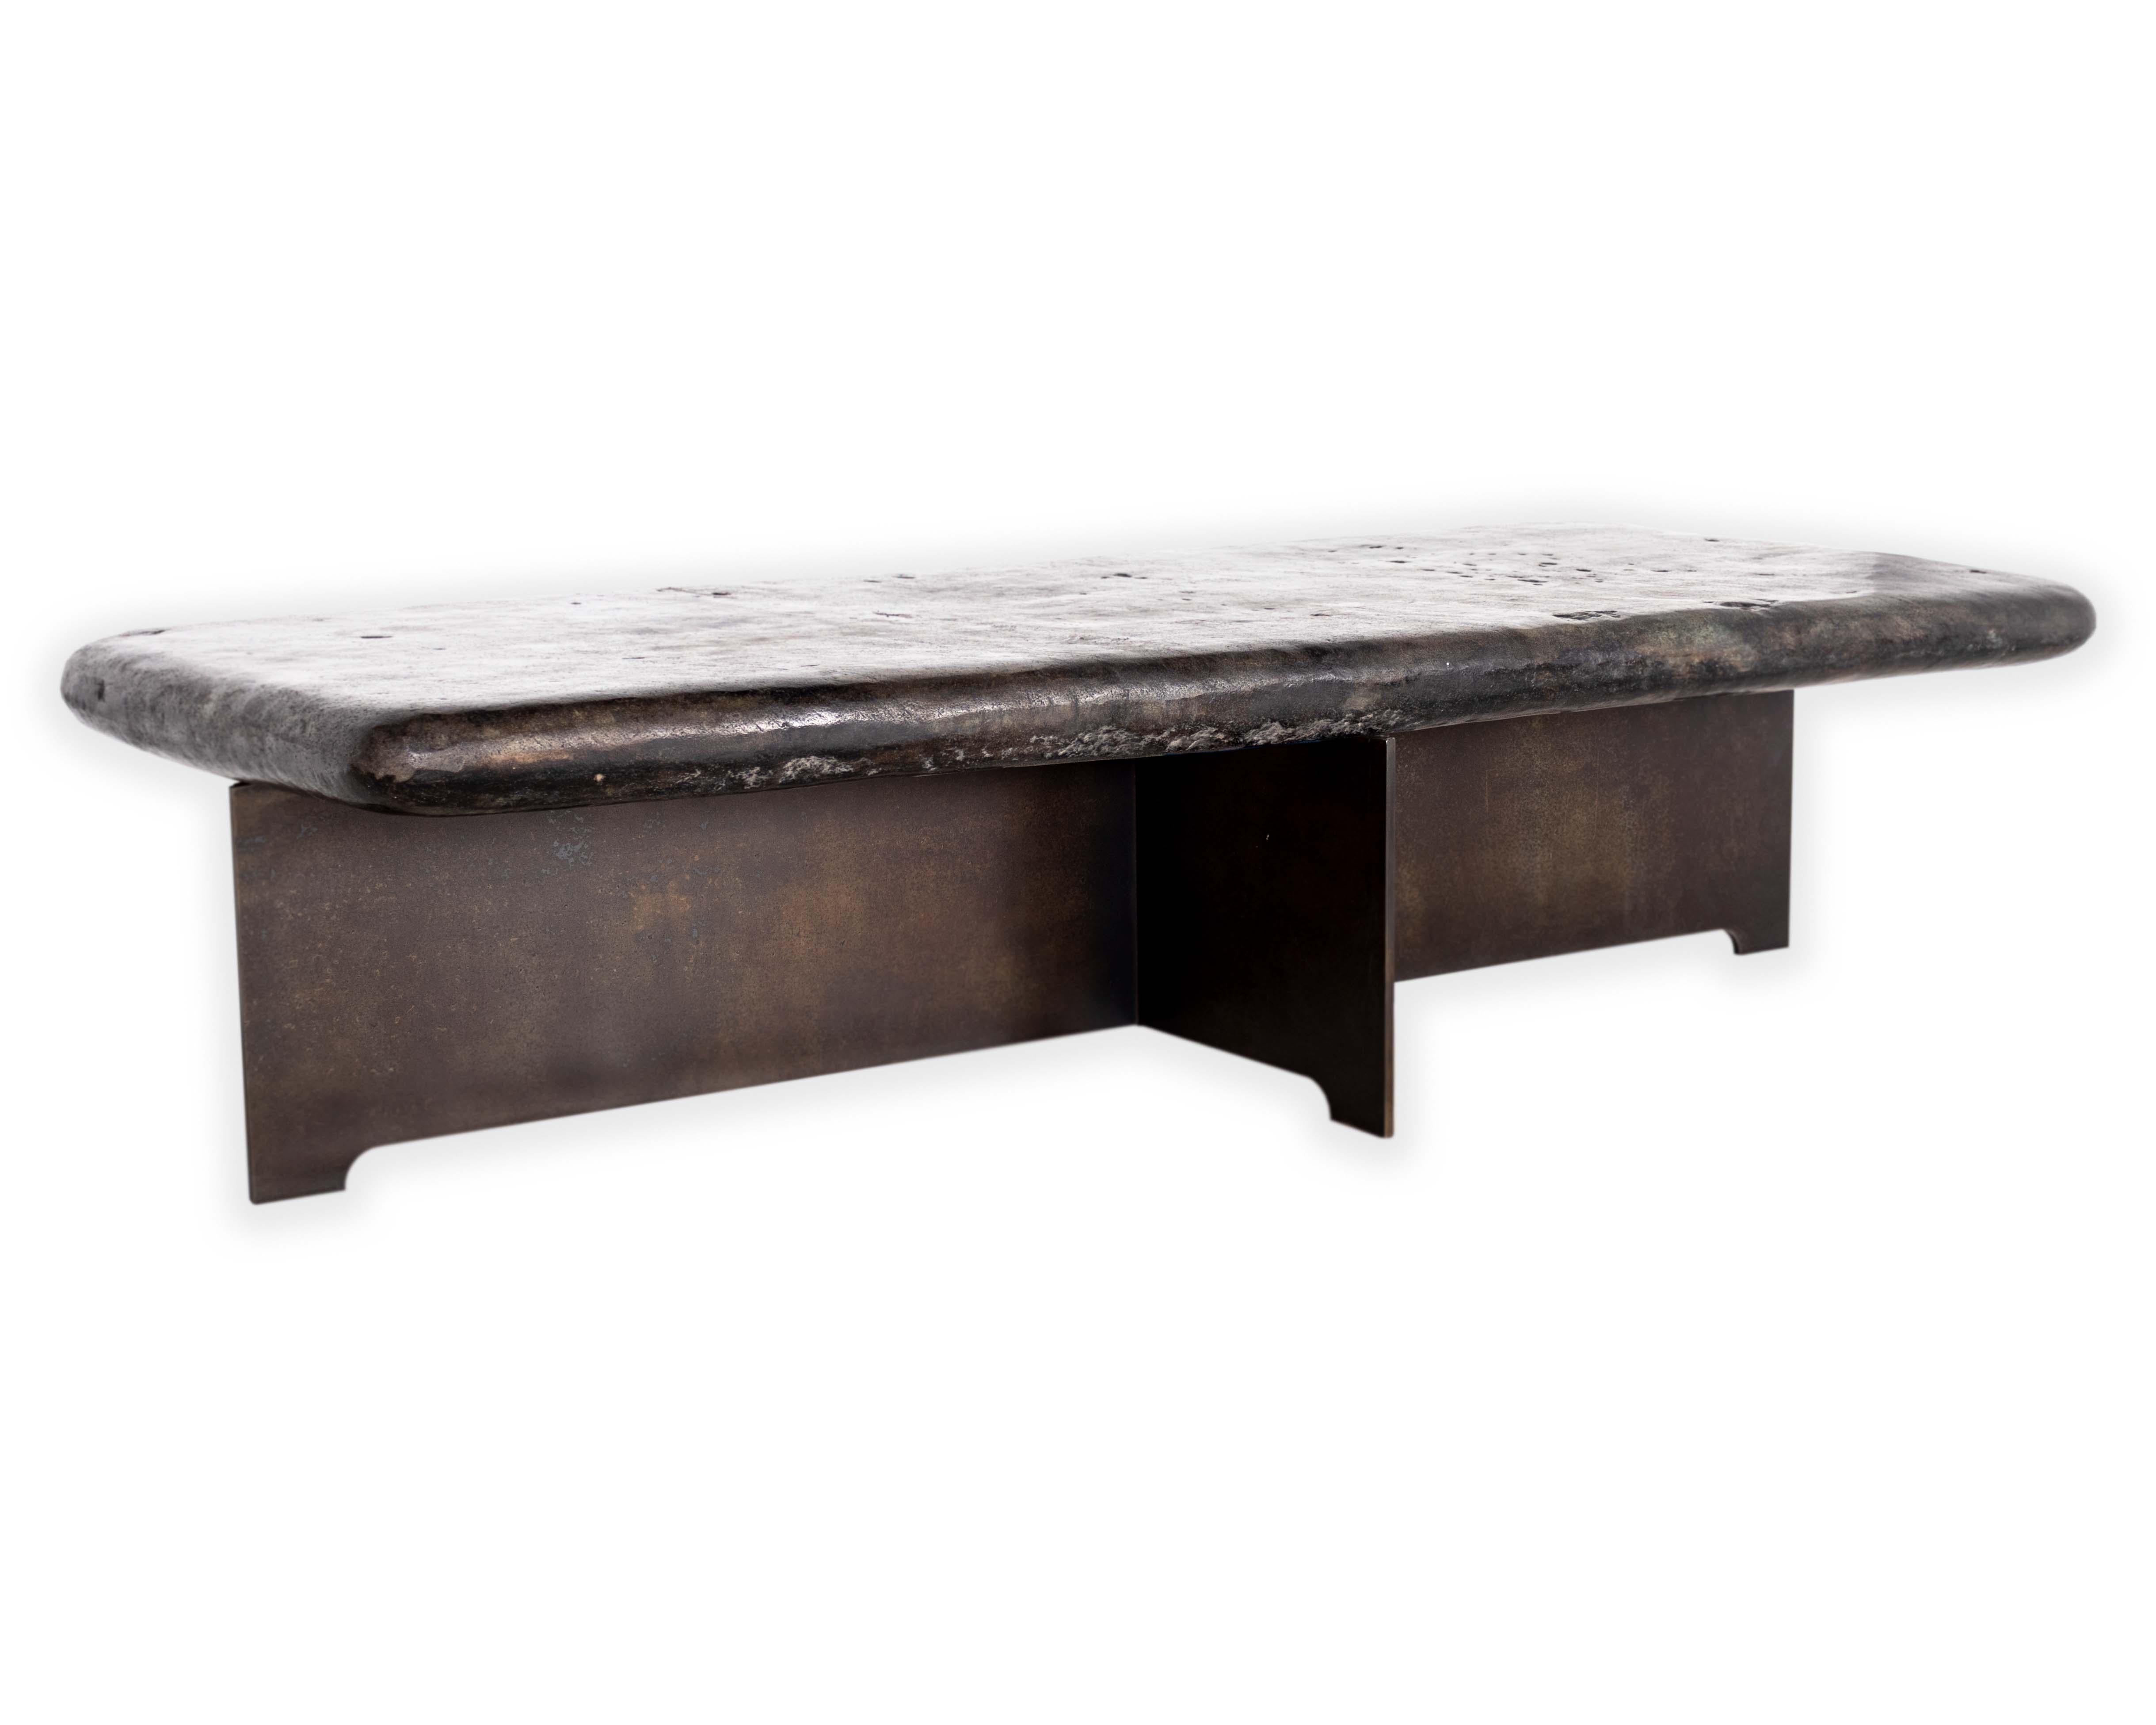 Belgian Balinese Hand Wrought River Stone Coffee Table on Steel Mount